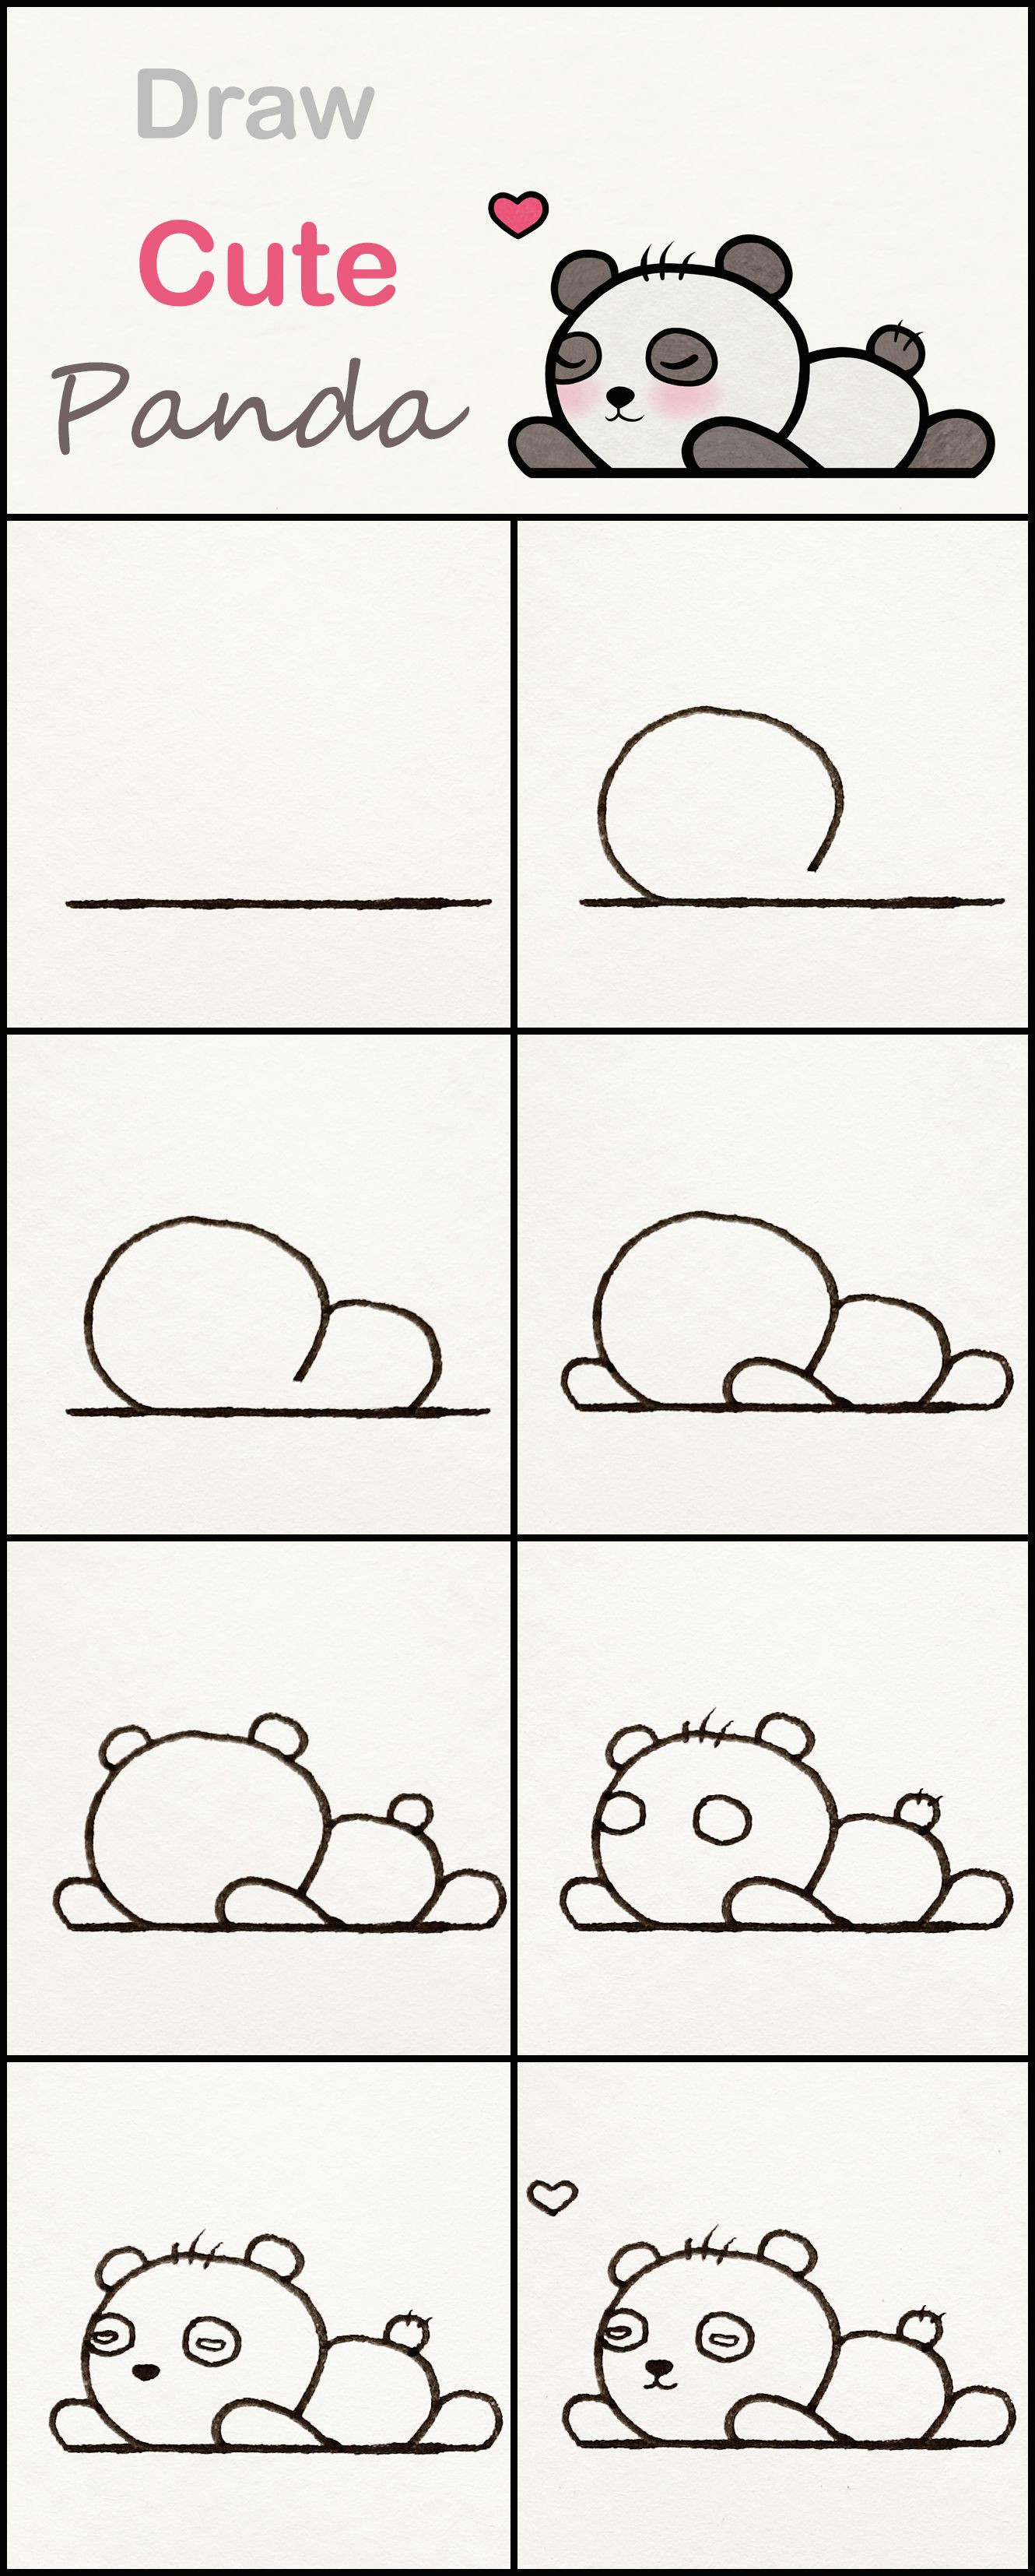 Easy Drawings In A Circle Learn How to Draw A Cute Baby Panda Step by Step A Very Simple